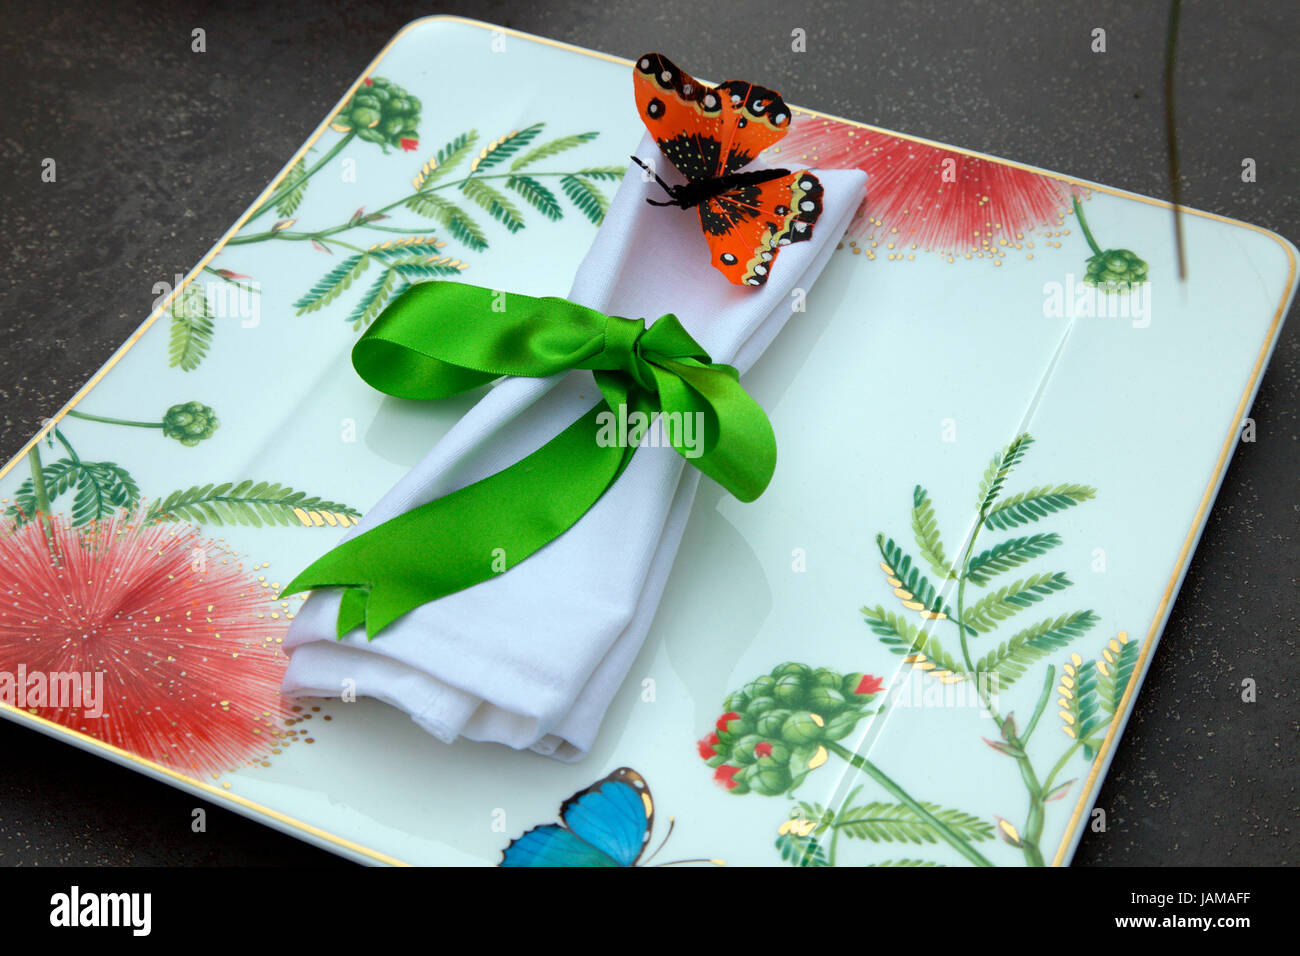 Stylish table setting at the Chelsea Flower Show 2017 Stock Photo